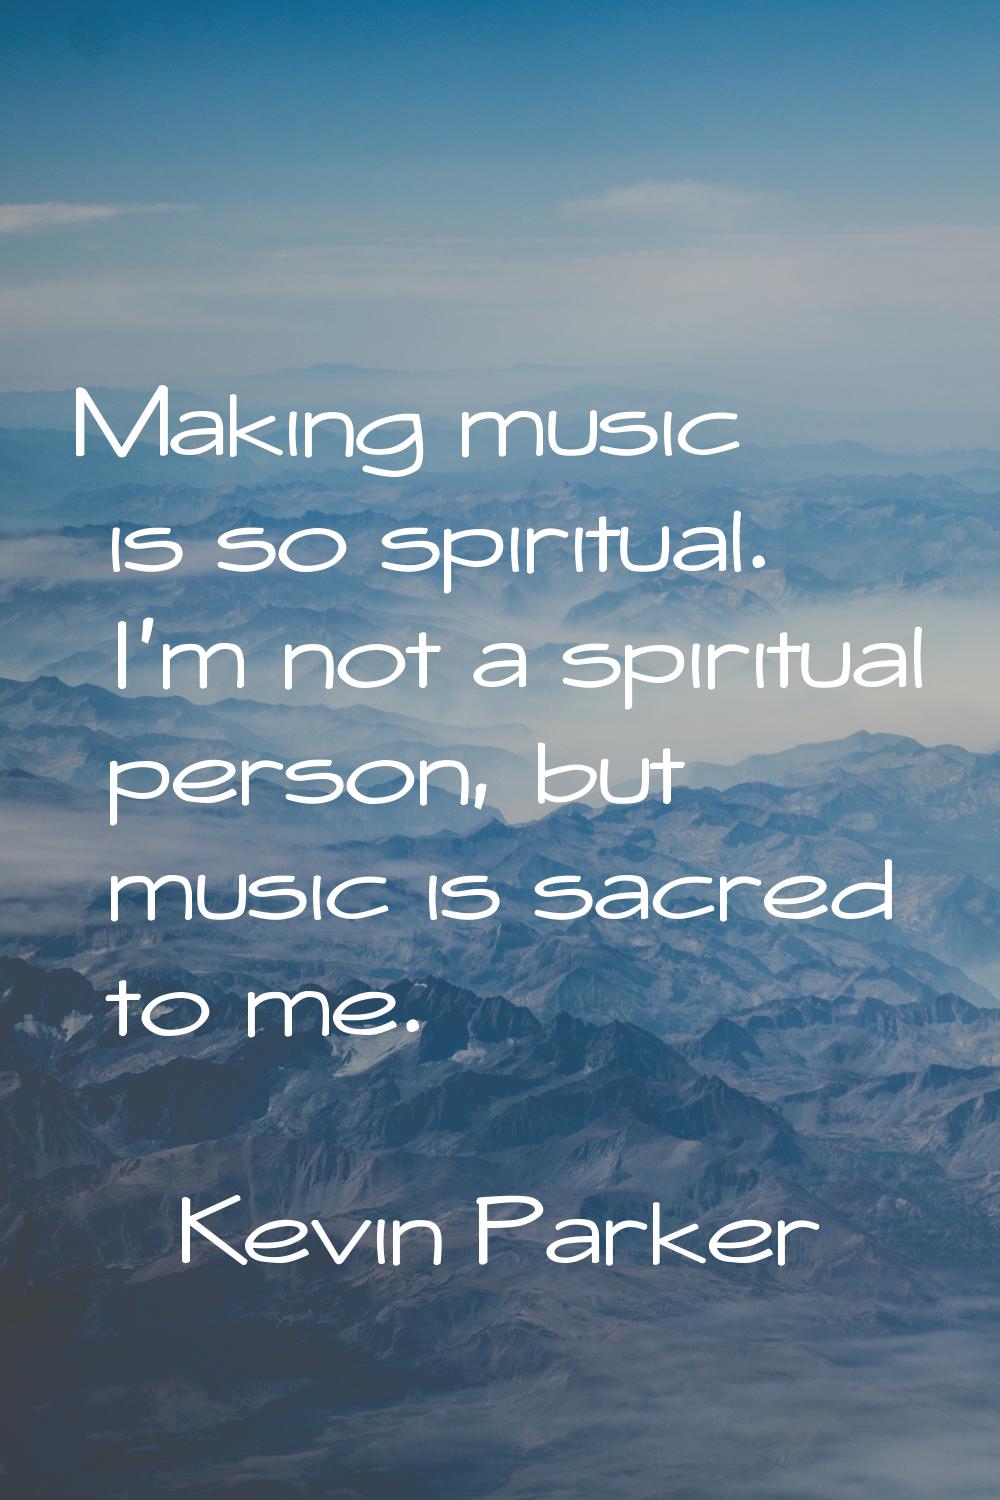 Making music is so spiritual. I'm not a spiritual person, but music is sacred to me.